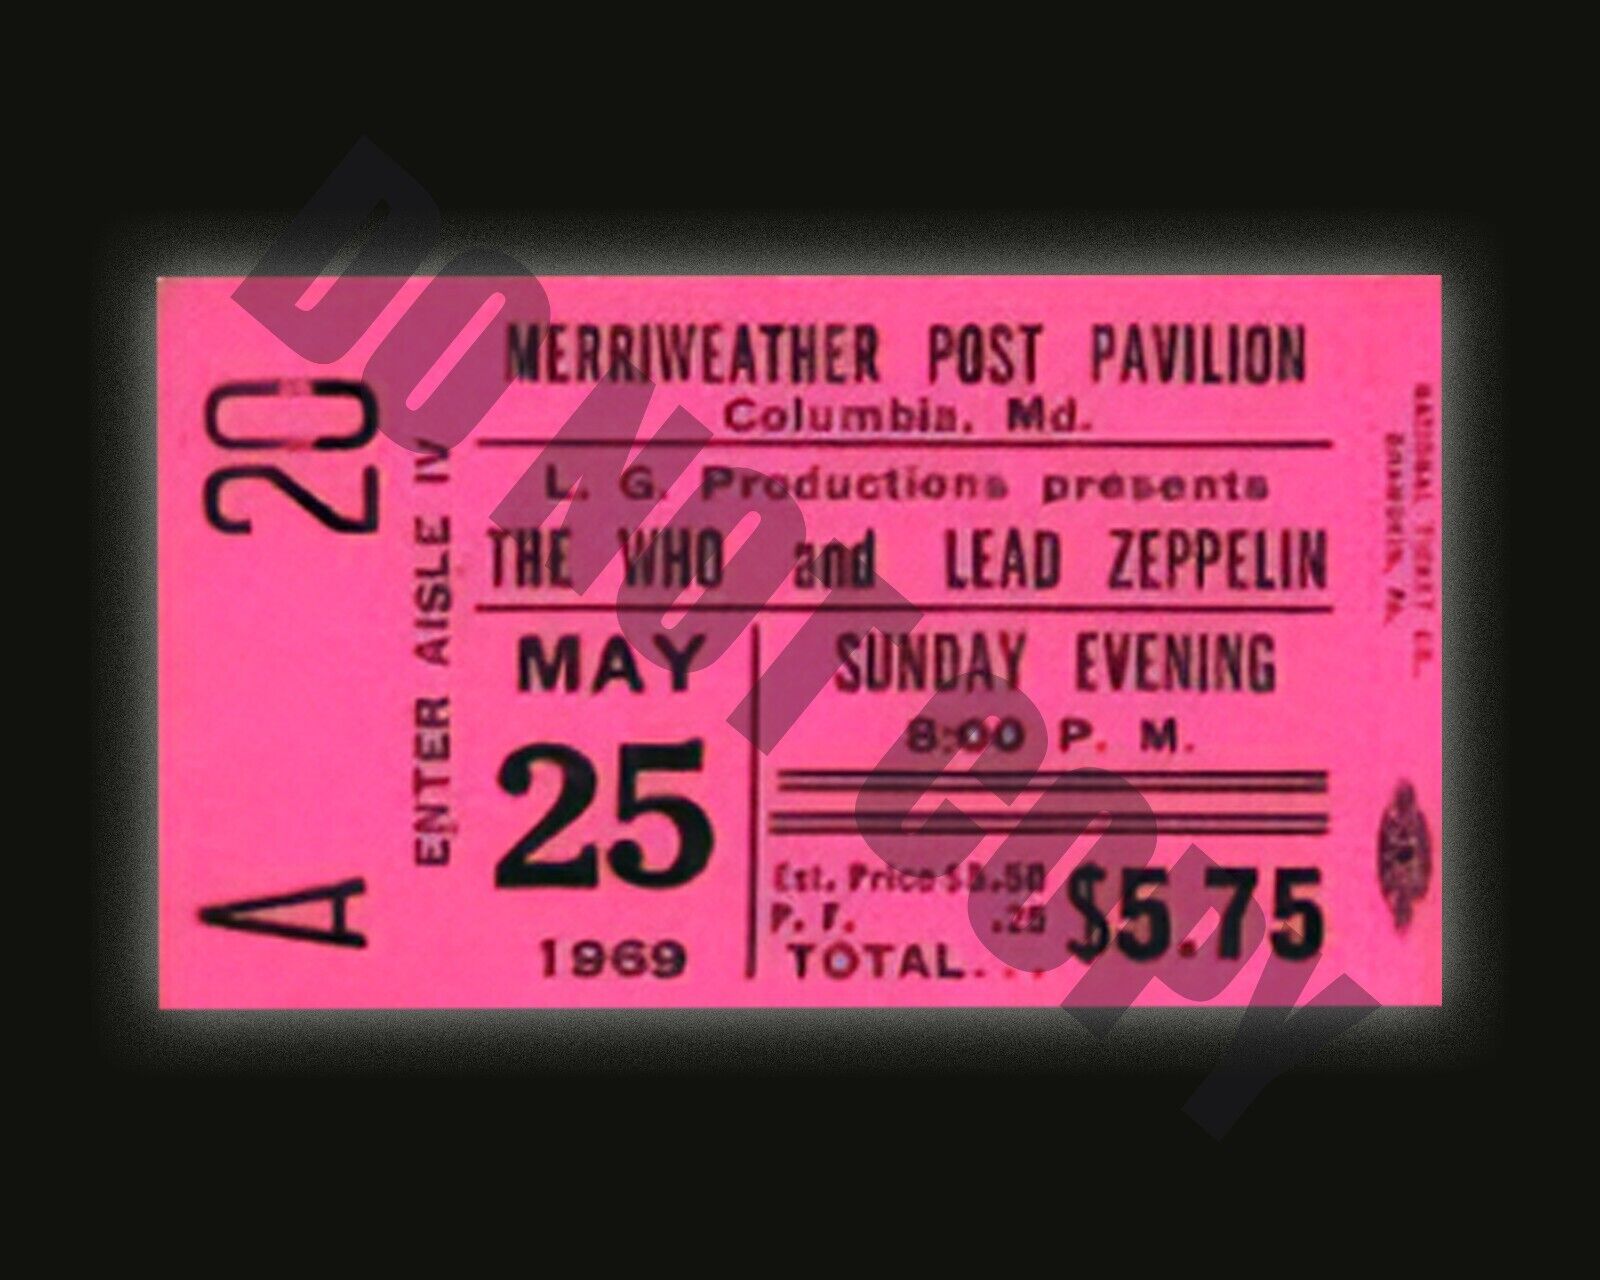 May 1969 The Who Led Zeppelin Concert Ticket Merriweather Post Pavilion Photo